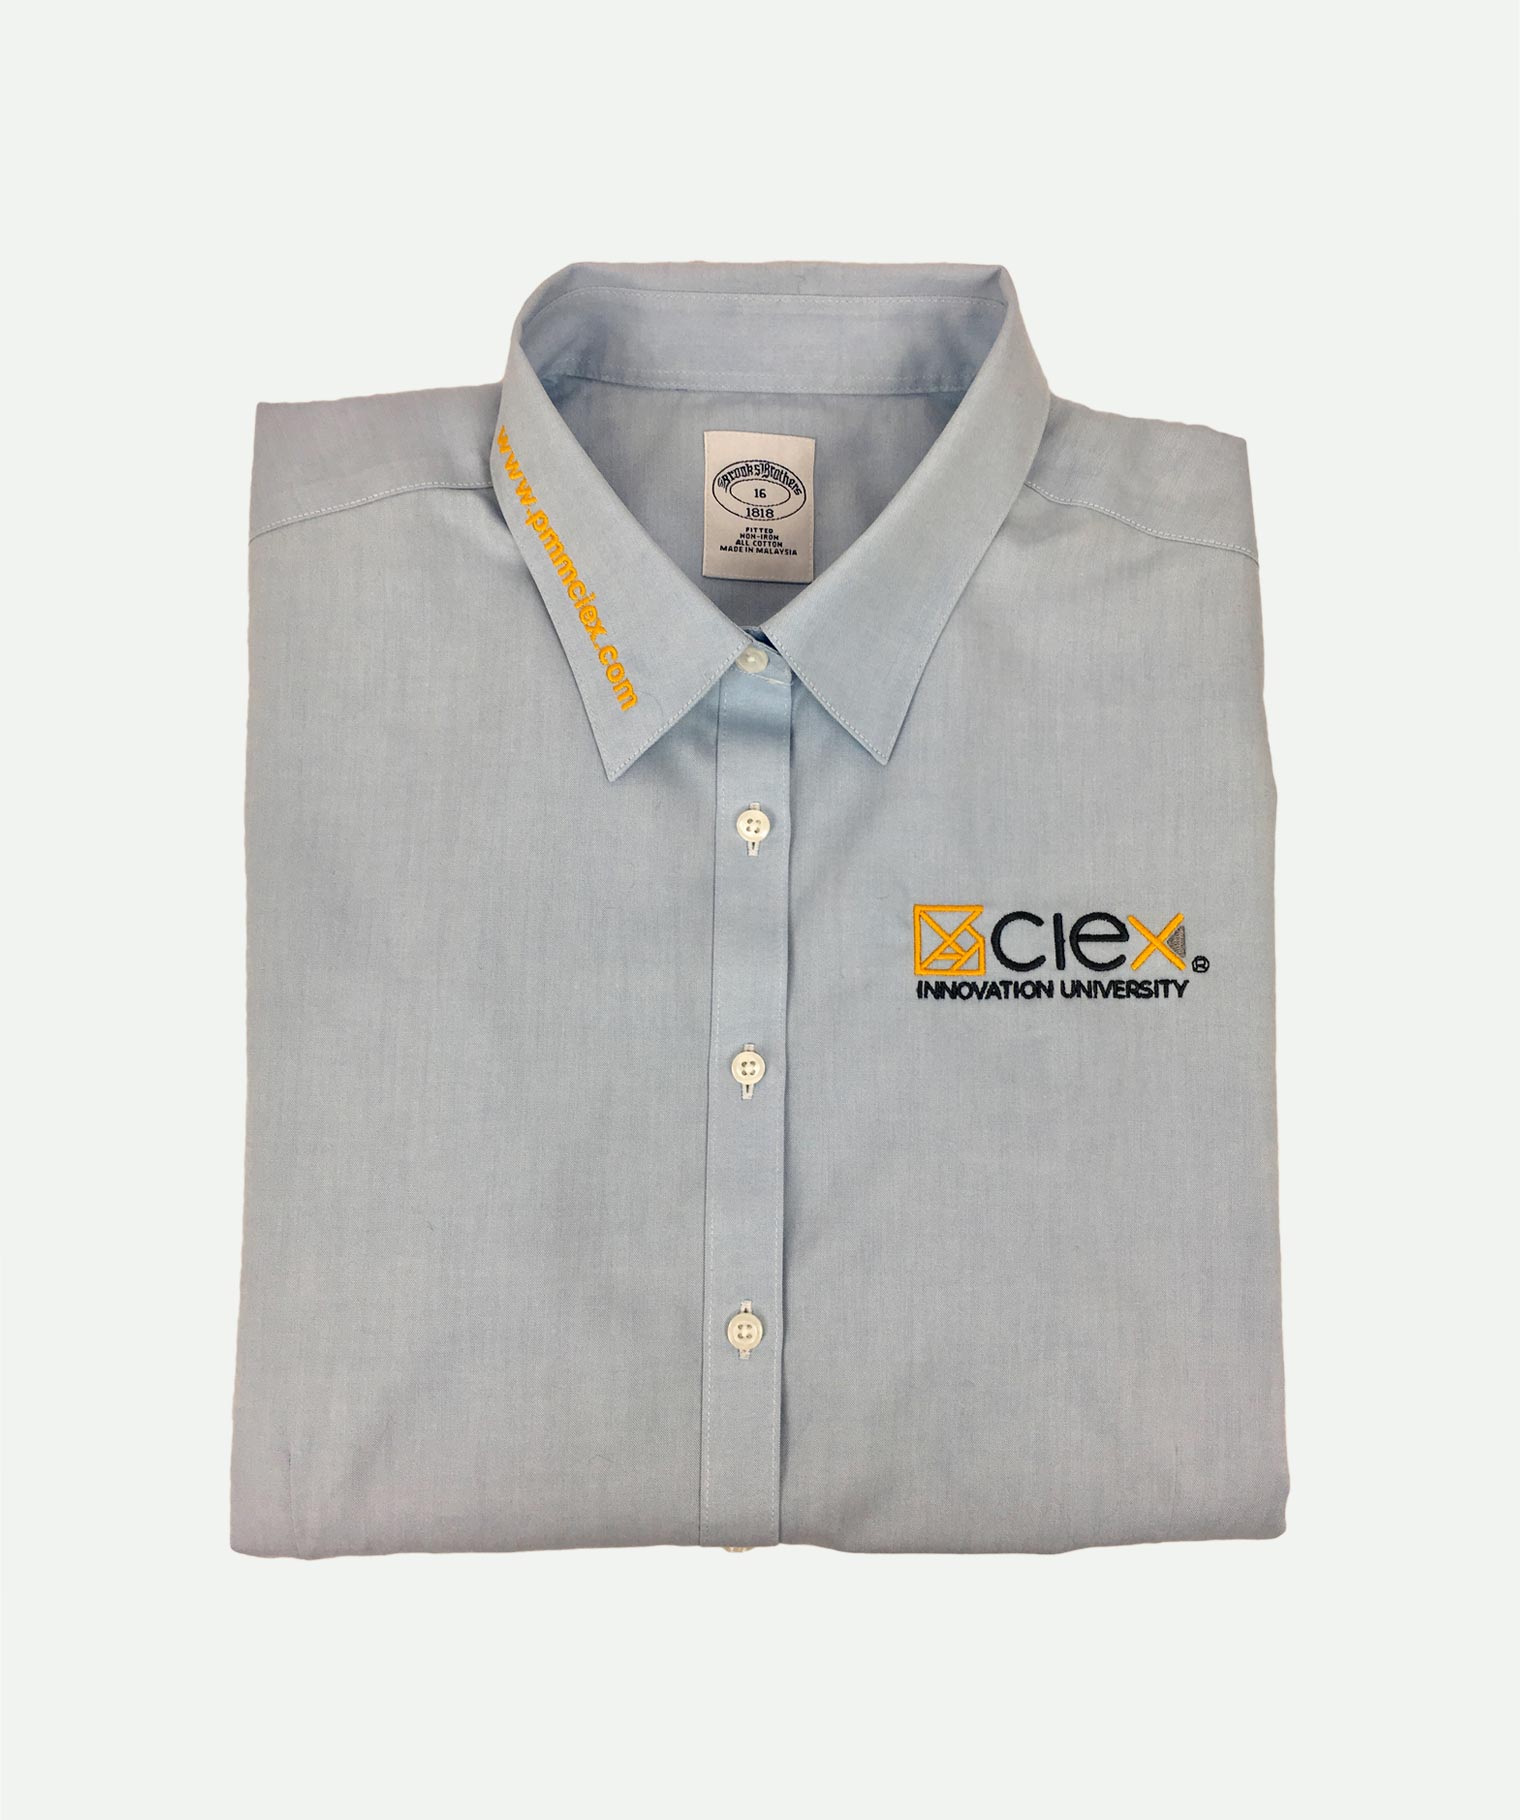 Light blue shirt with 2 embroideries